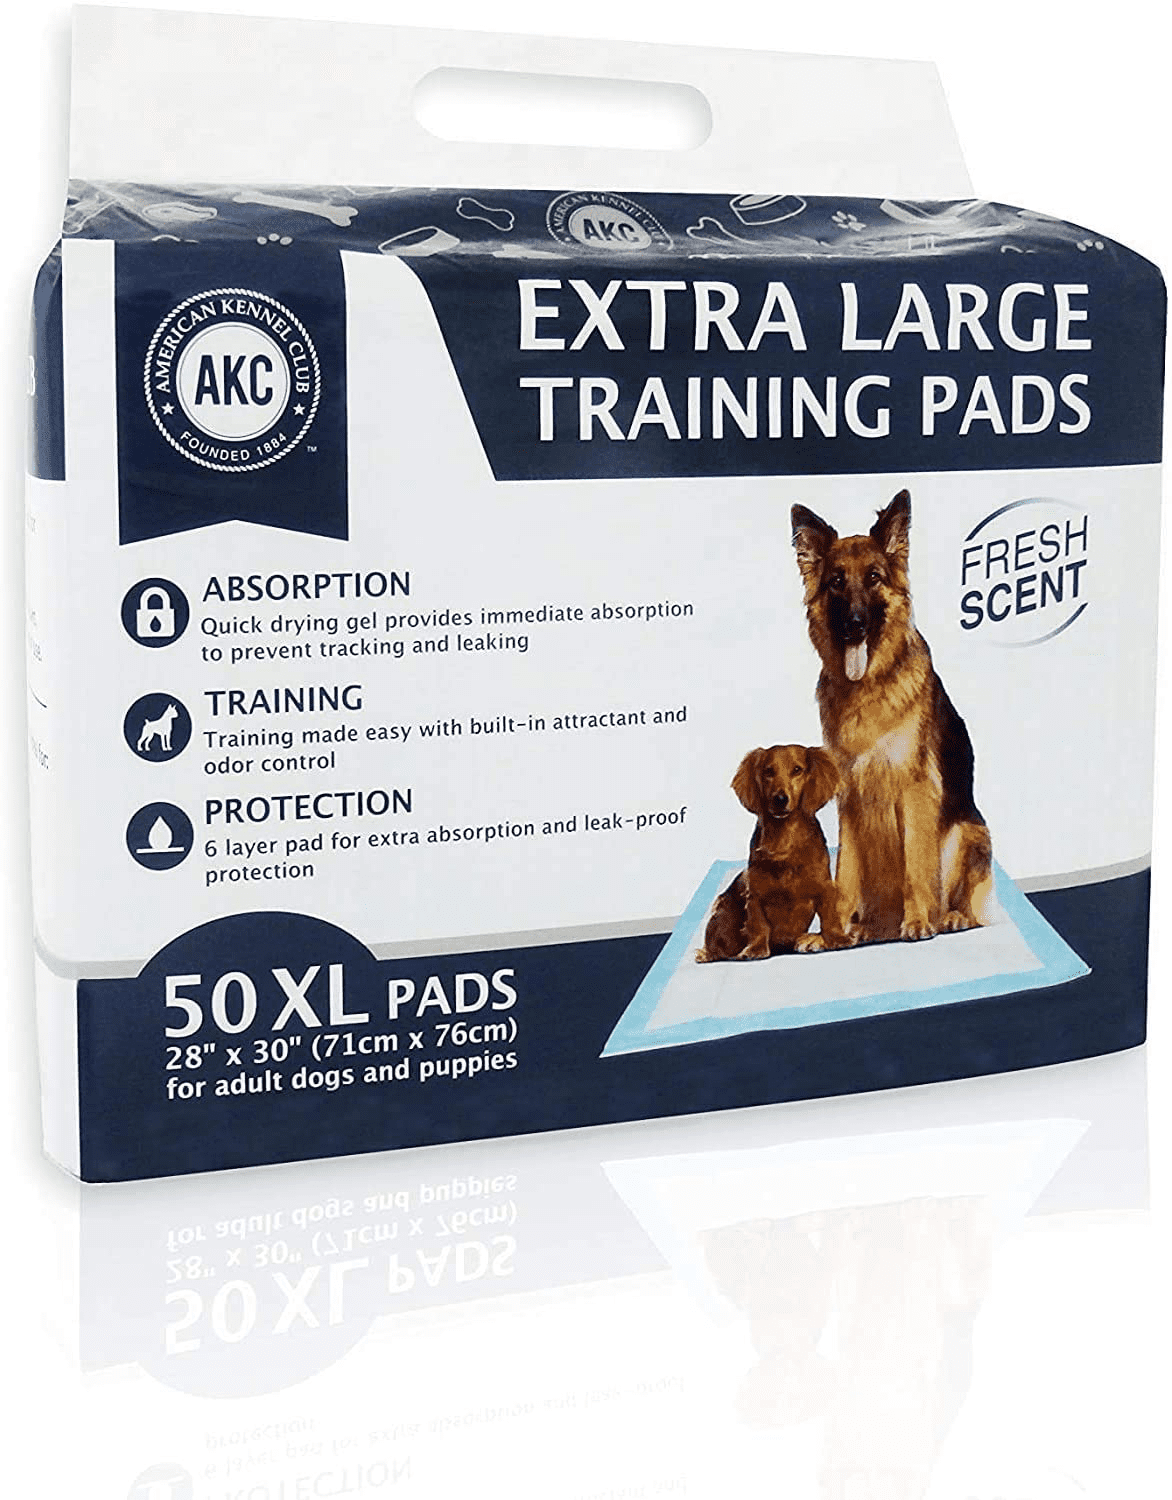 36 Heavy Buddies Dog Puppy 17x24 Pet Disposable Training Wee Wee Pads Underpads 